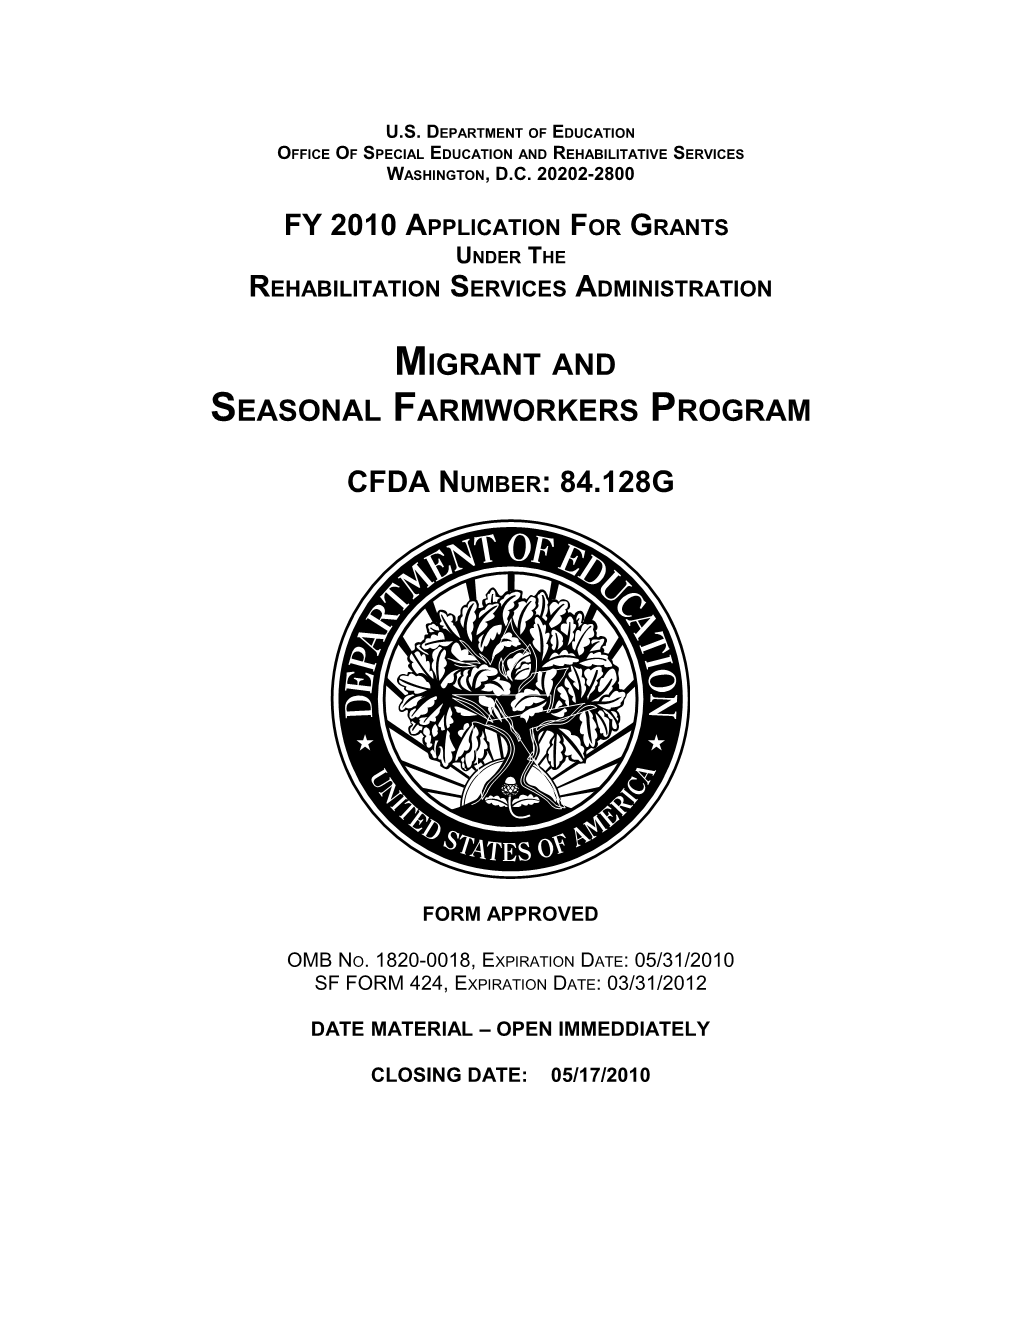 FY 2010 Application for Grants Under the Rehabilitation Services Administration; Migrant